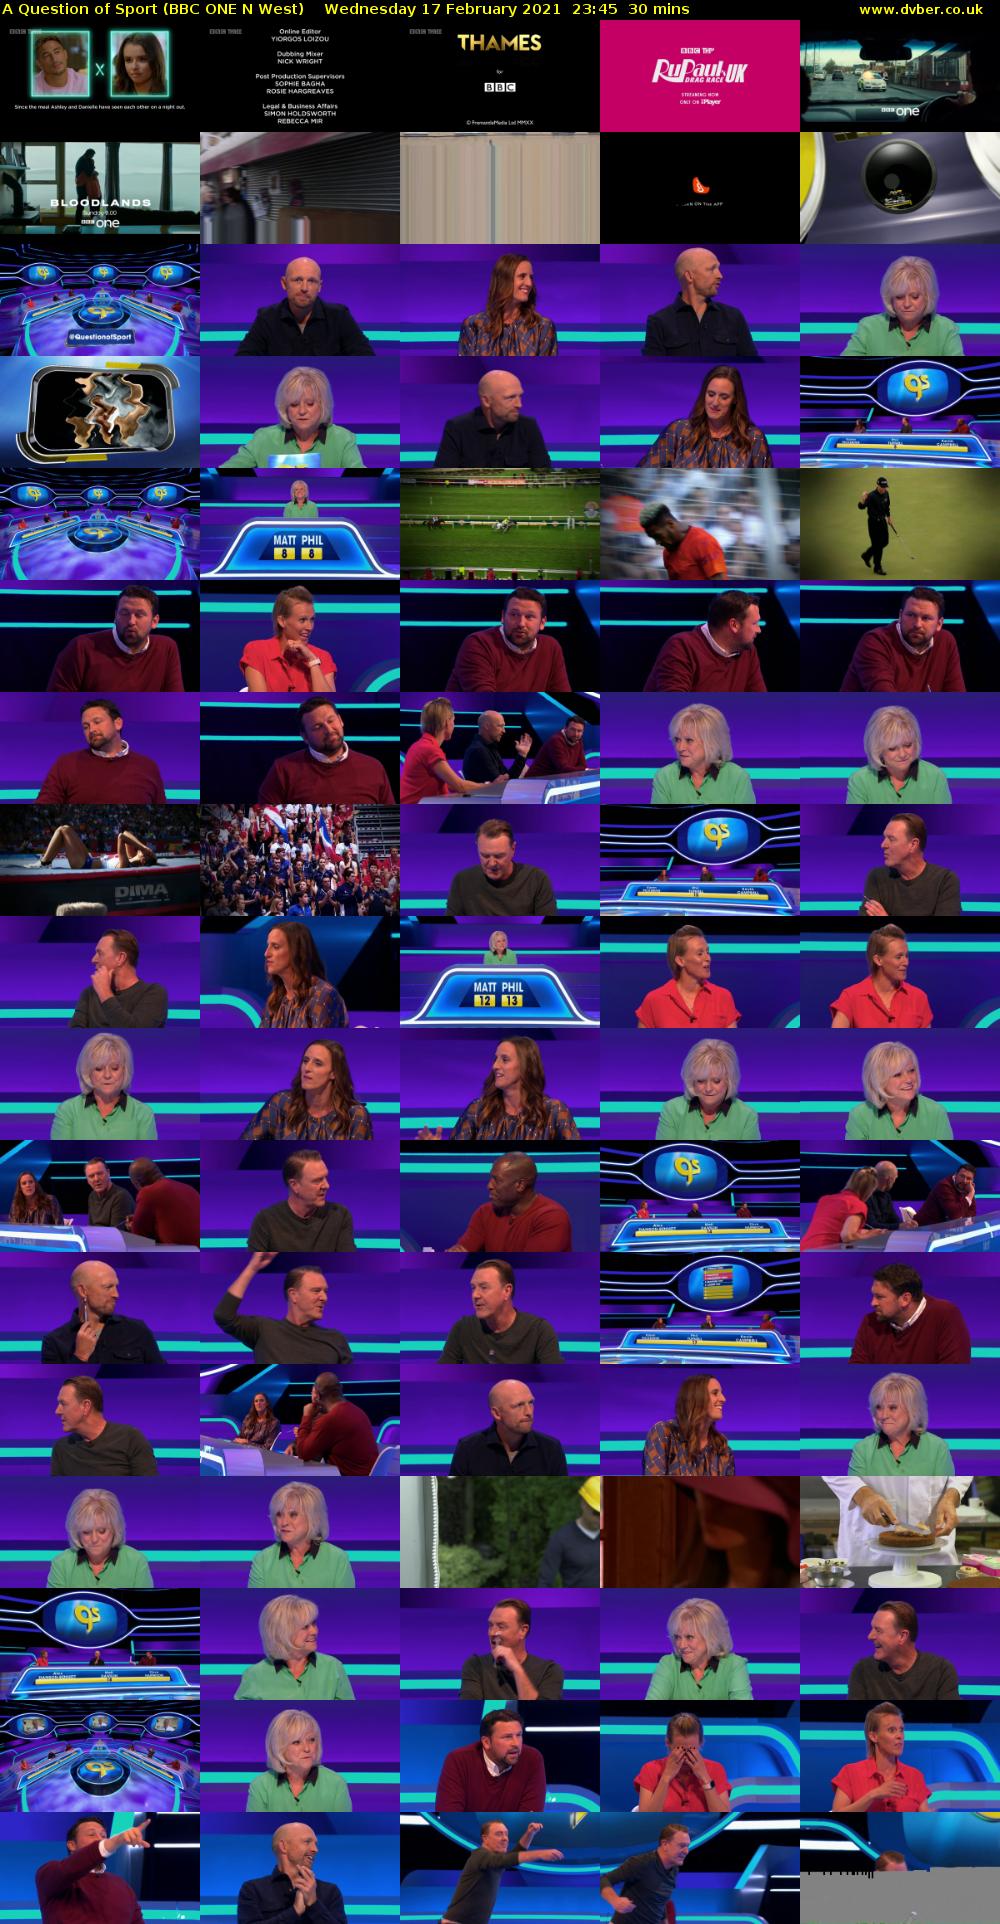 A Question of Sport (BBC ONE N West) Wednesday 17 February 2021 23:45 - 00:15